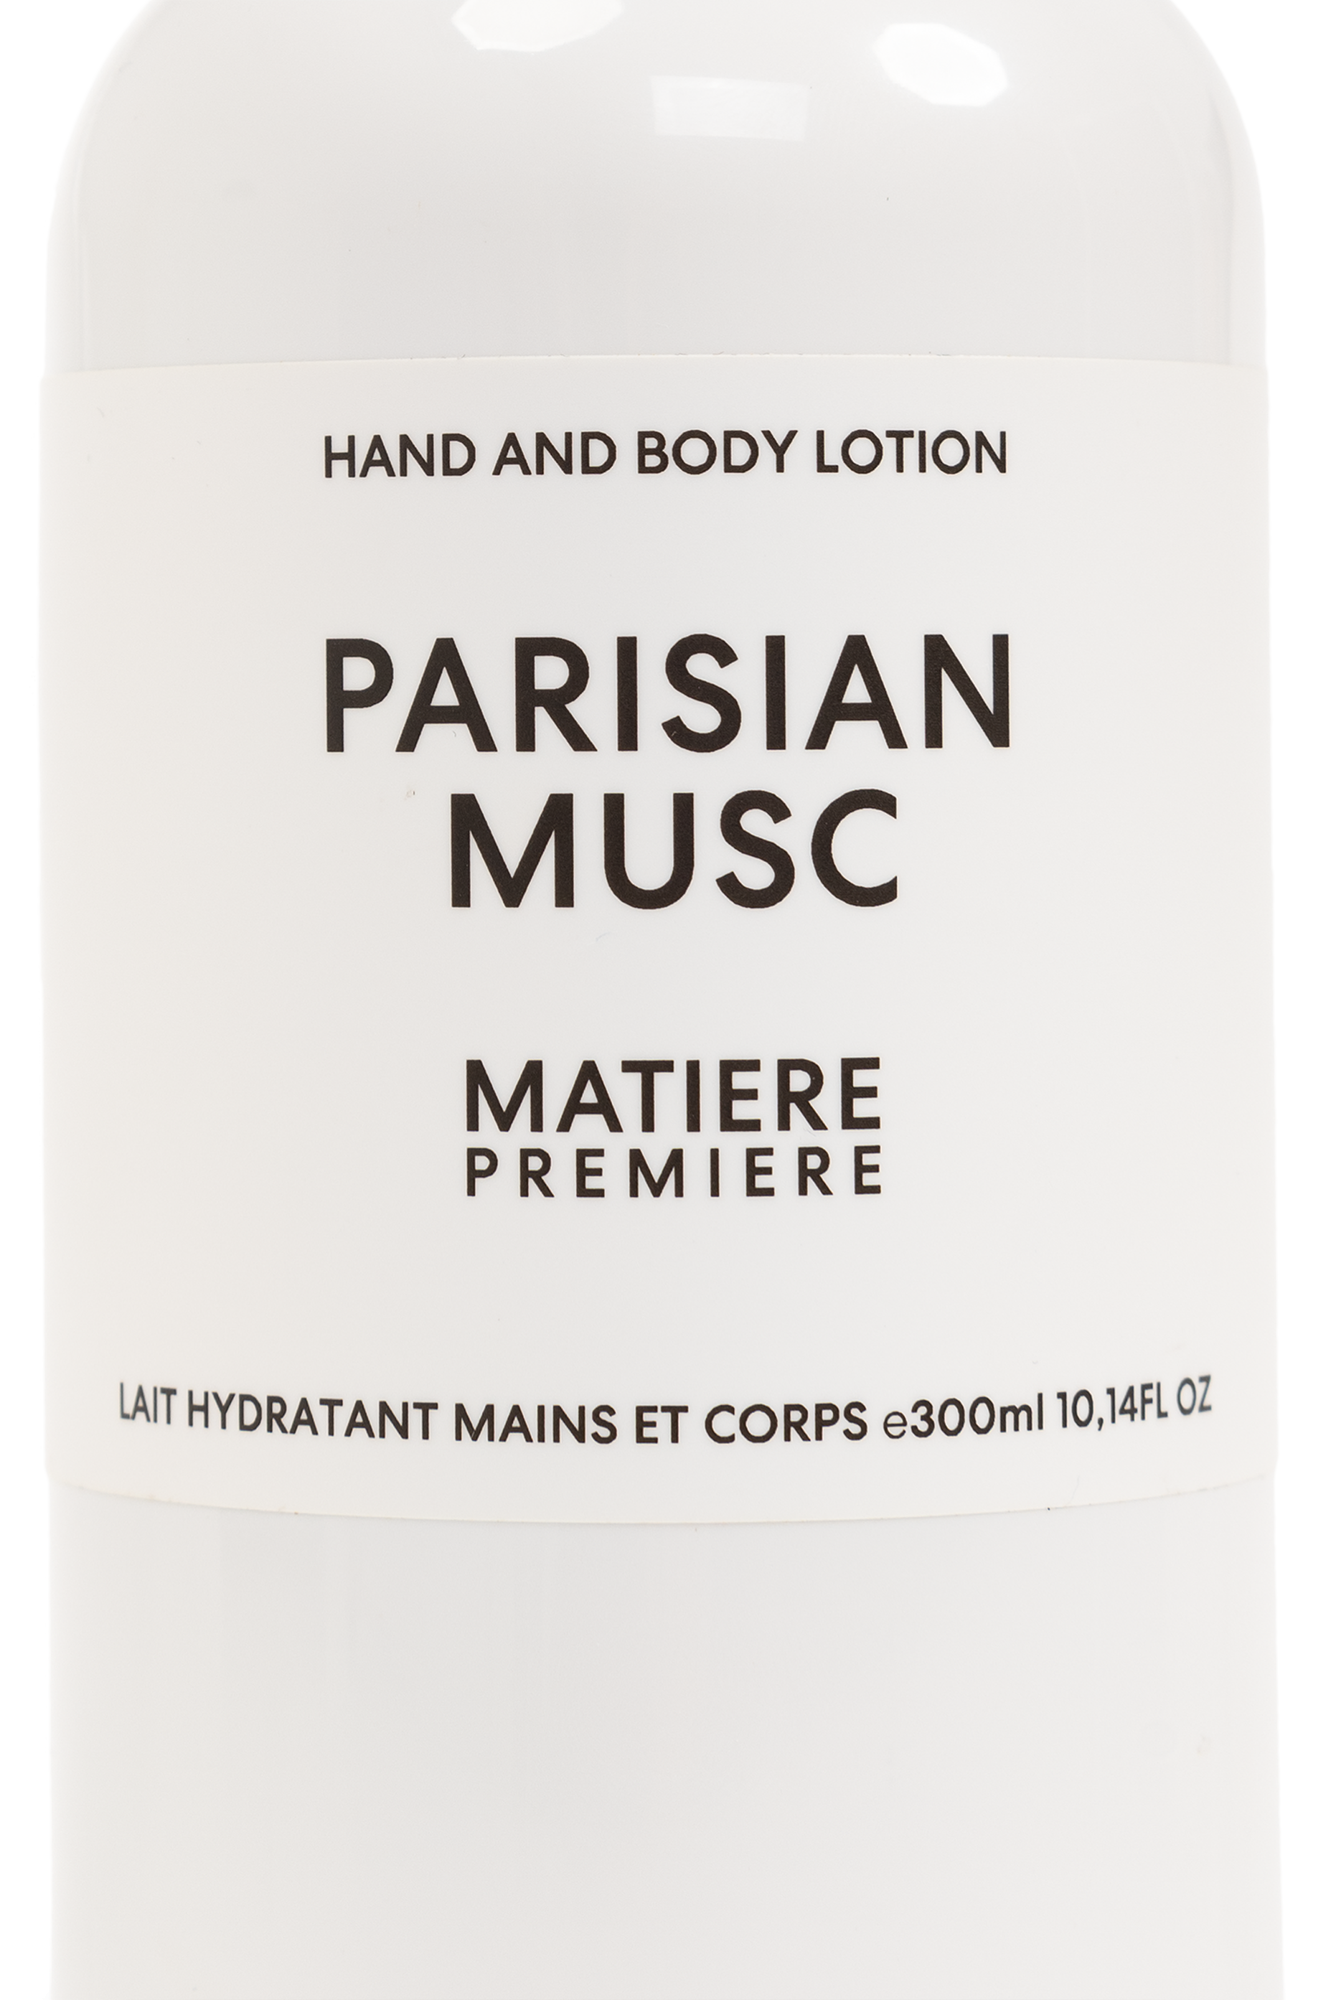 Matiere Premiere ‘Parisian Musc’ body and hand lotion